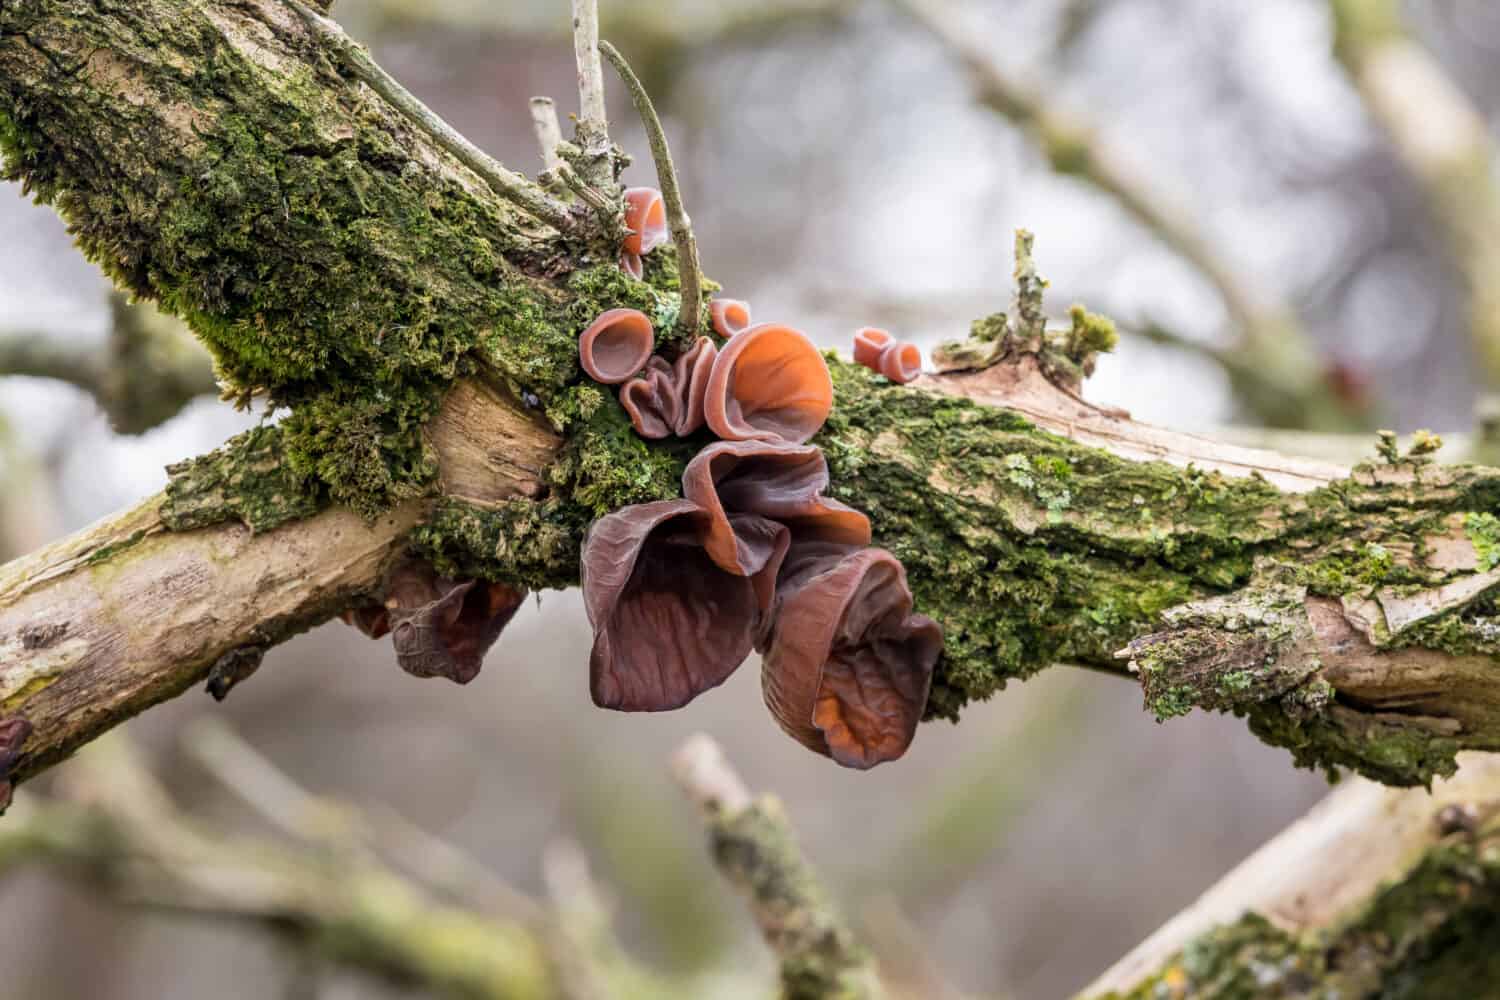 Edible mushrooms known as Wood ear, Jews ear or Jelly ear (Auricularia auricula-judae) in autumnal forest with blurred background